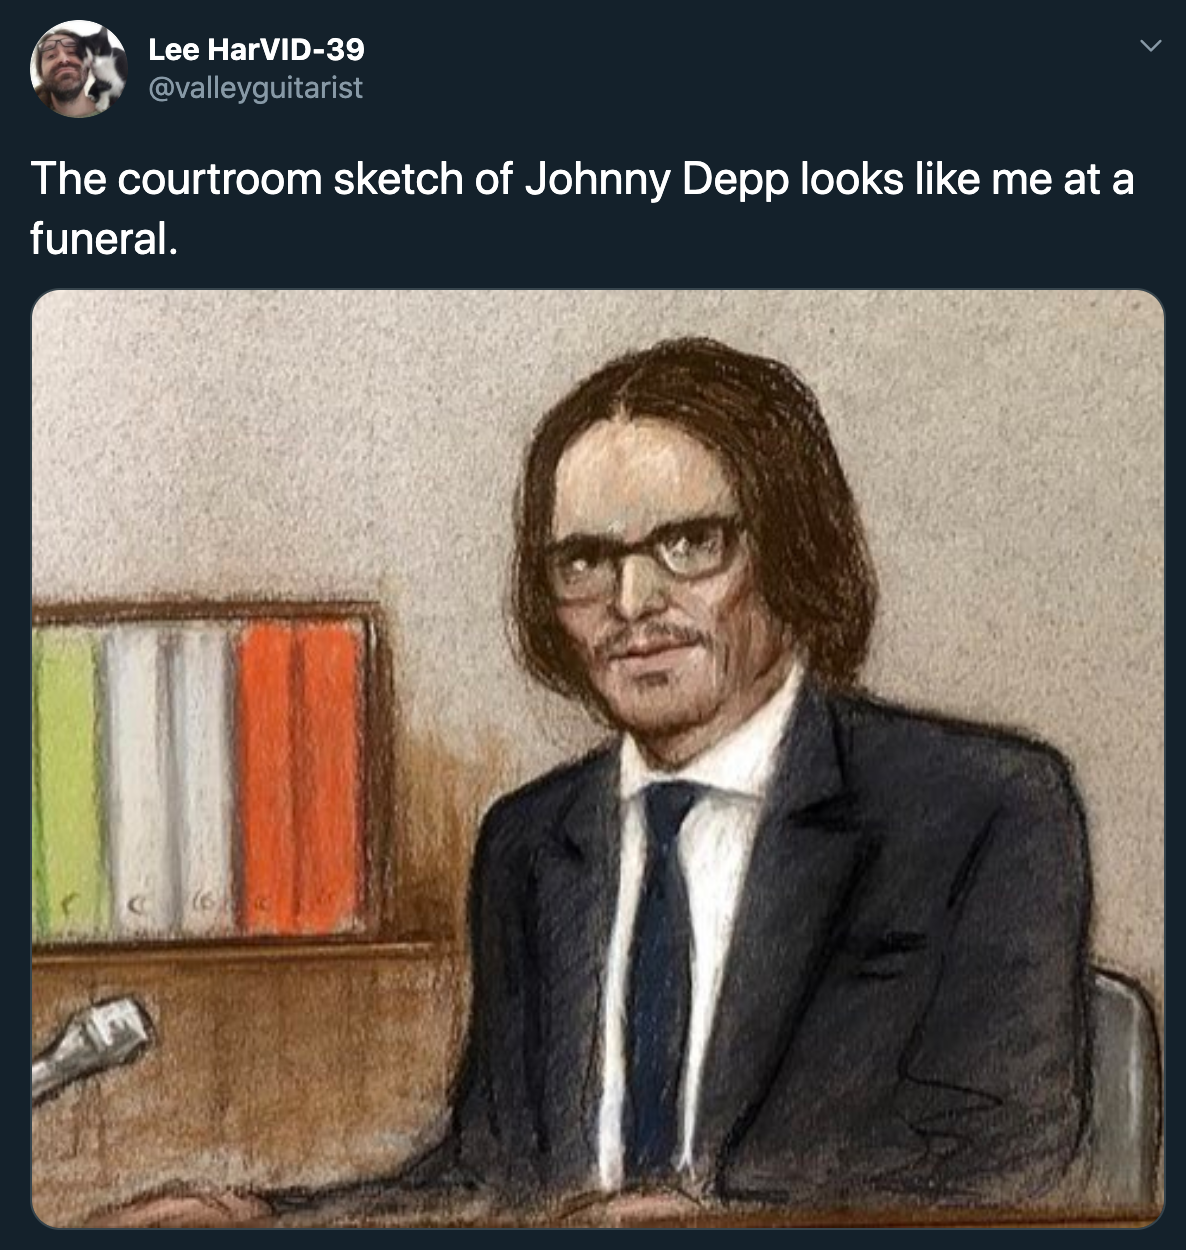 The courtroom sketch of Johnny Depp looks me at a funeral.